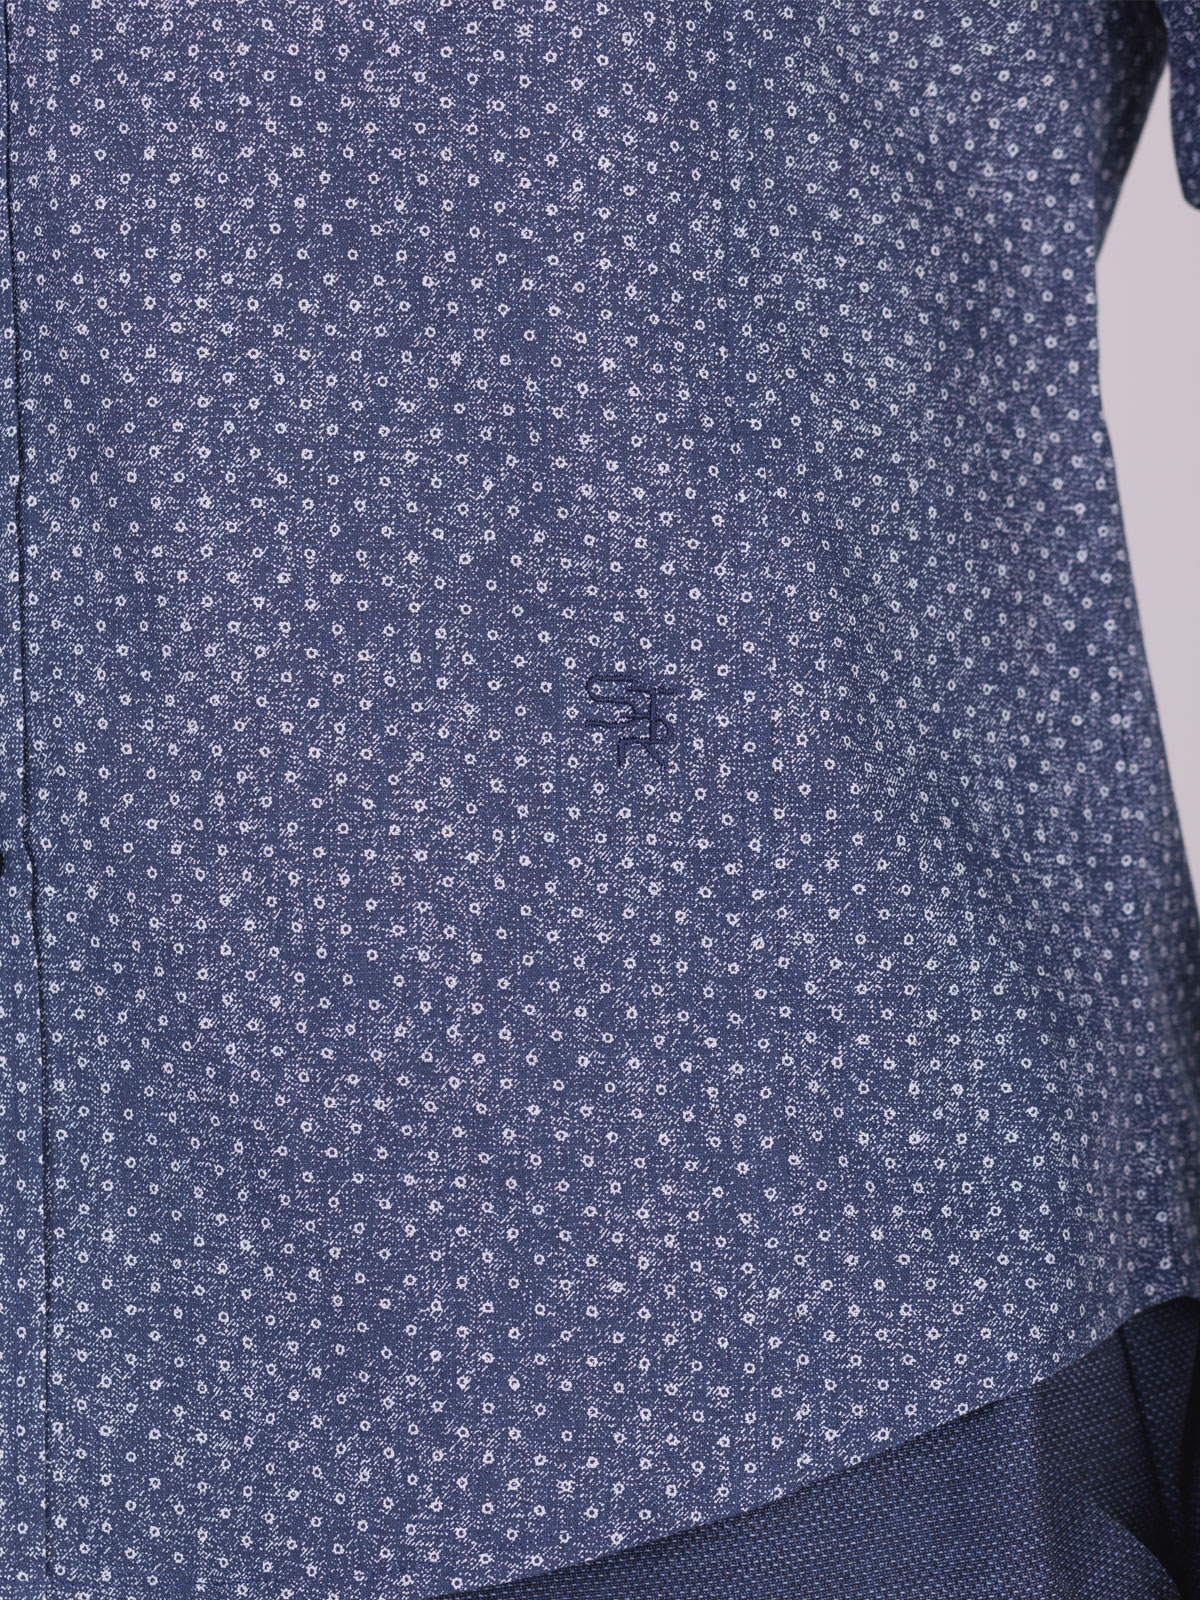 Mens shirt with floral patterns - 21573 € 44.43 img3